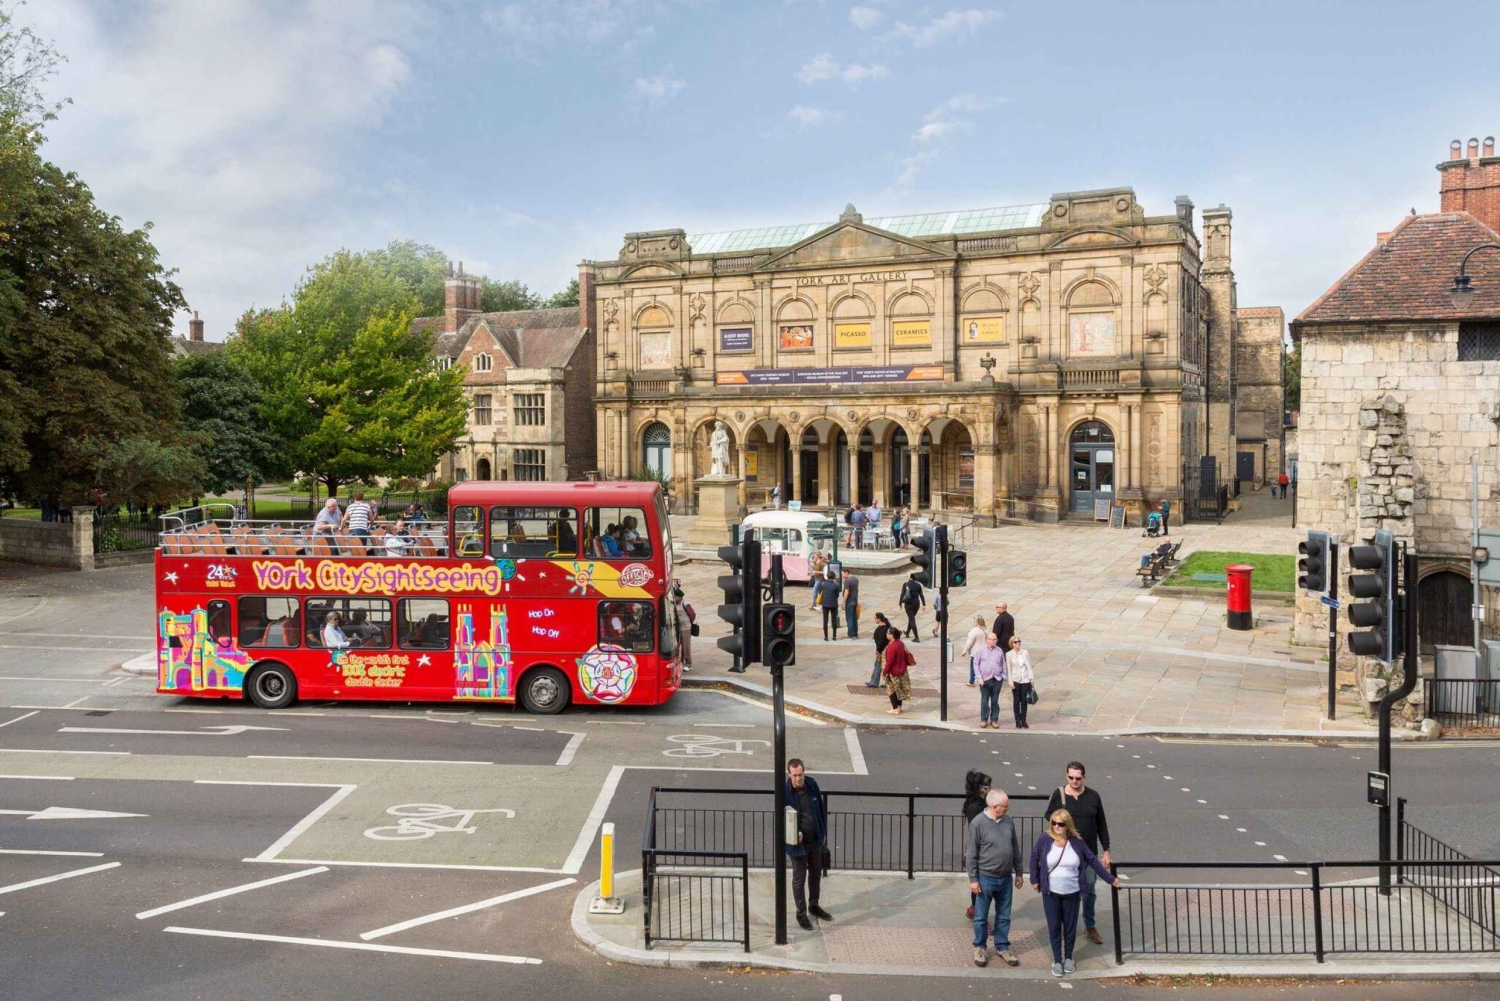 York: City Sightseeing Hop-On Hop-Off Bus Tour